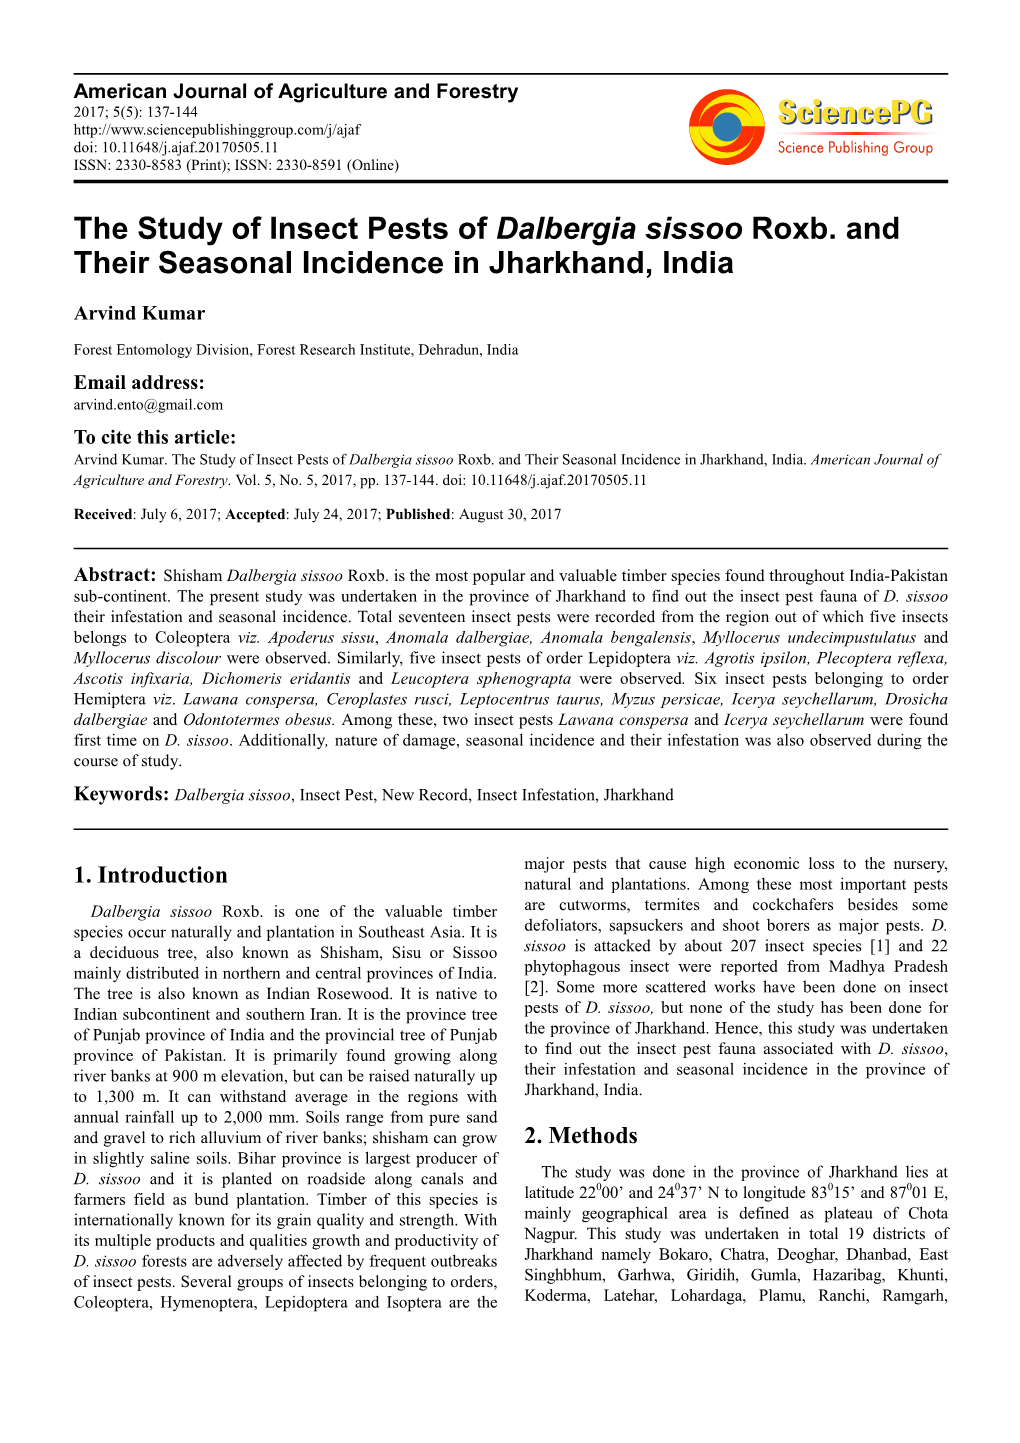 The Study of Insect Pests of Dalbergia Sissoo Roxb. and Their Seasonal Incidence in Jharkhand, India